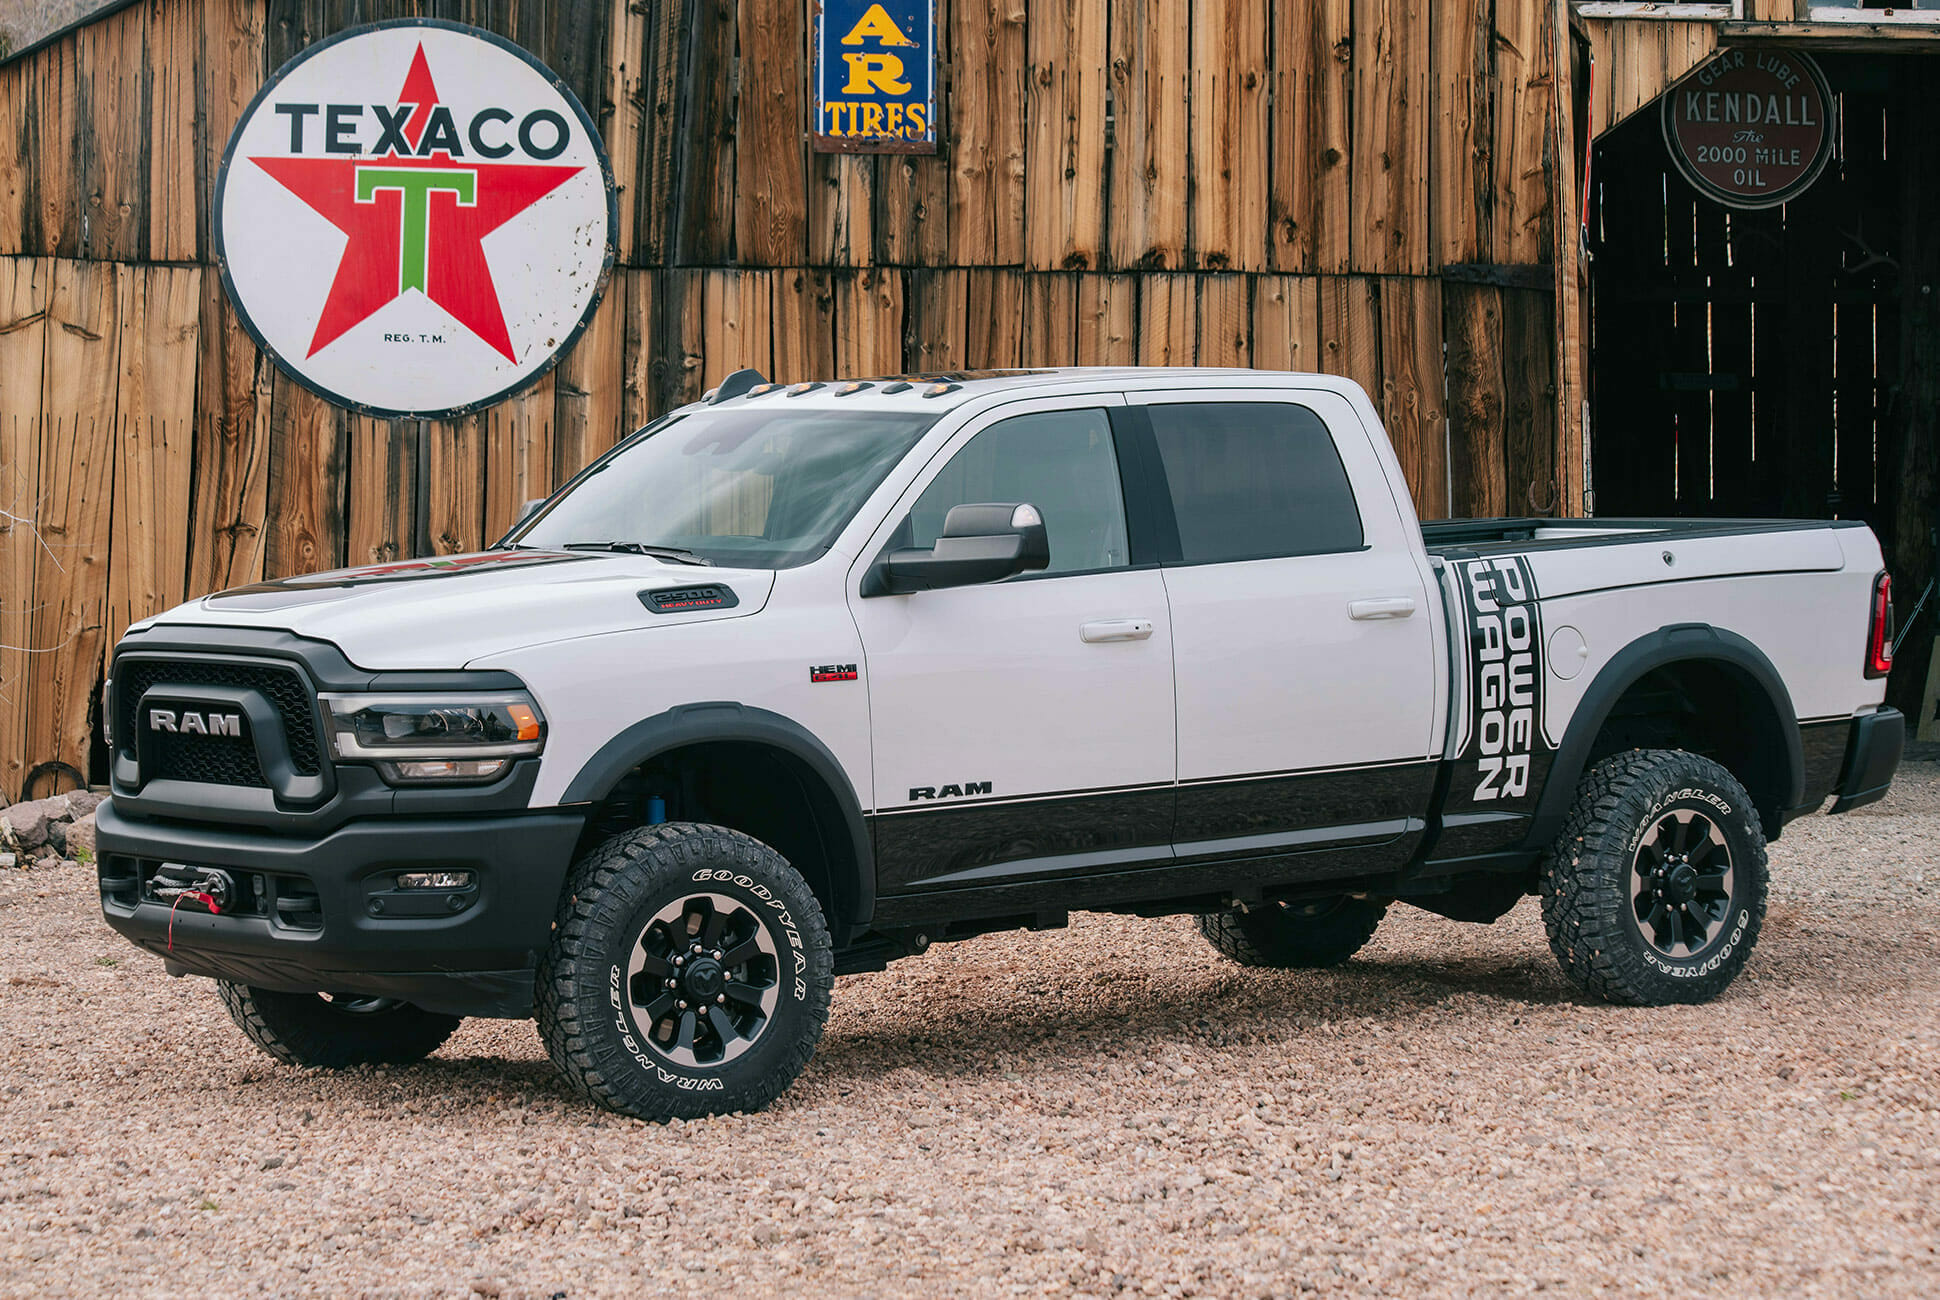 Blog The 2019 Ram Power Wagon Is The Most Capable Pickup You Can Buy